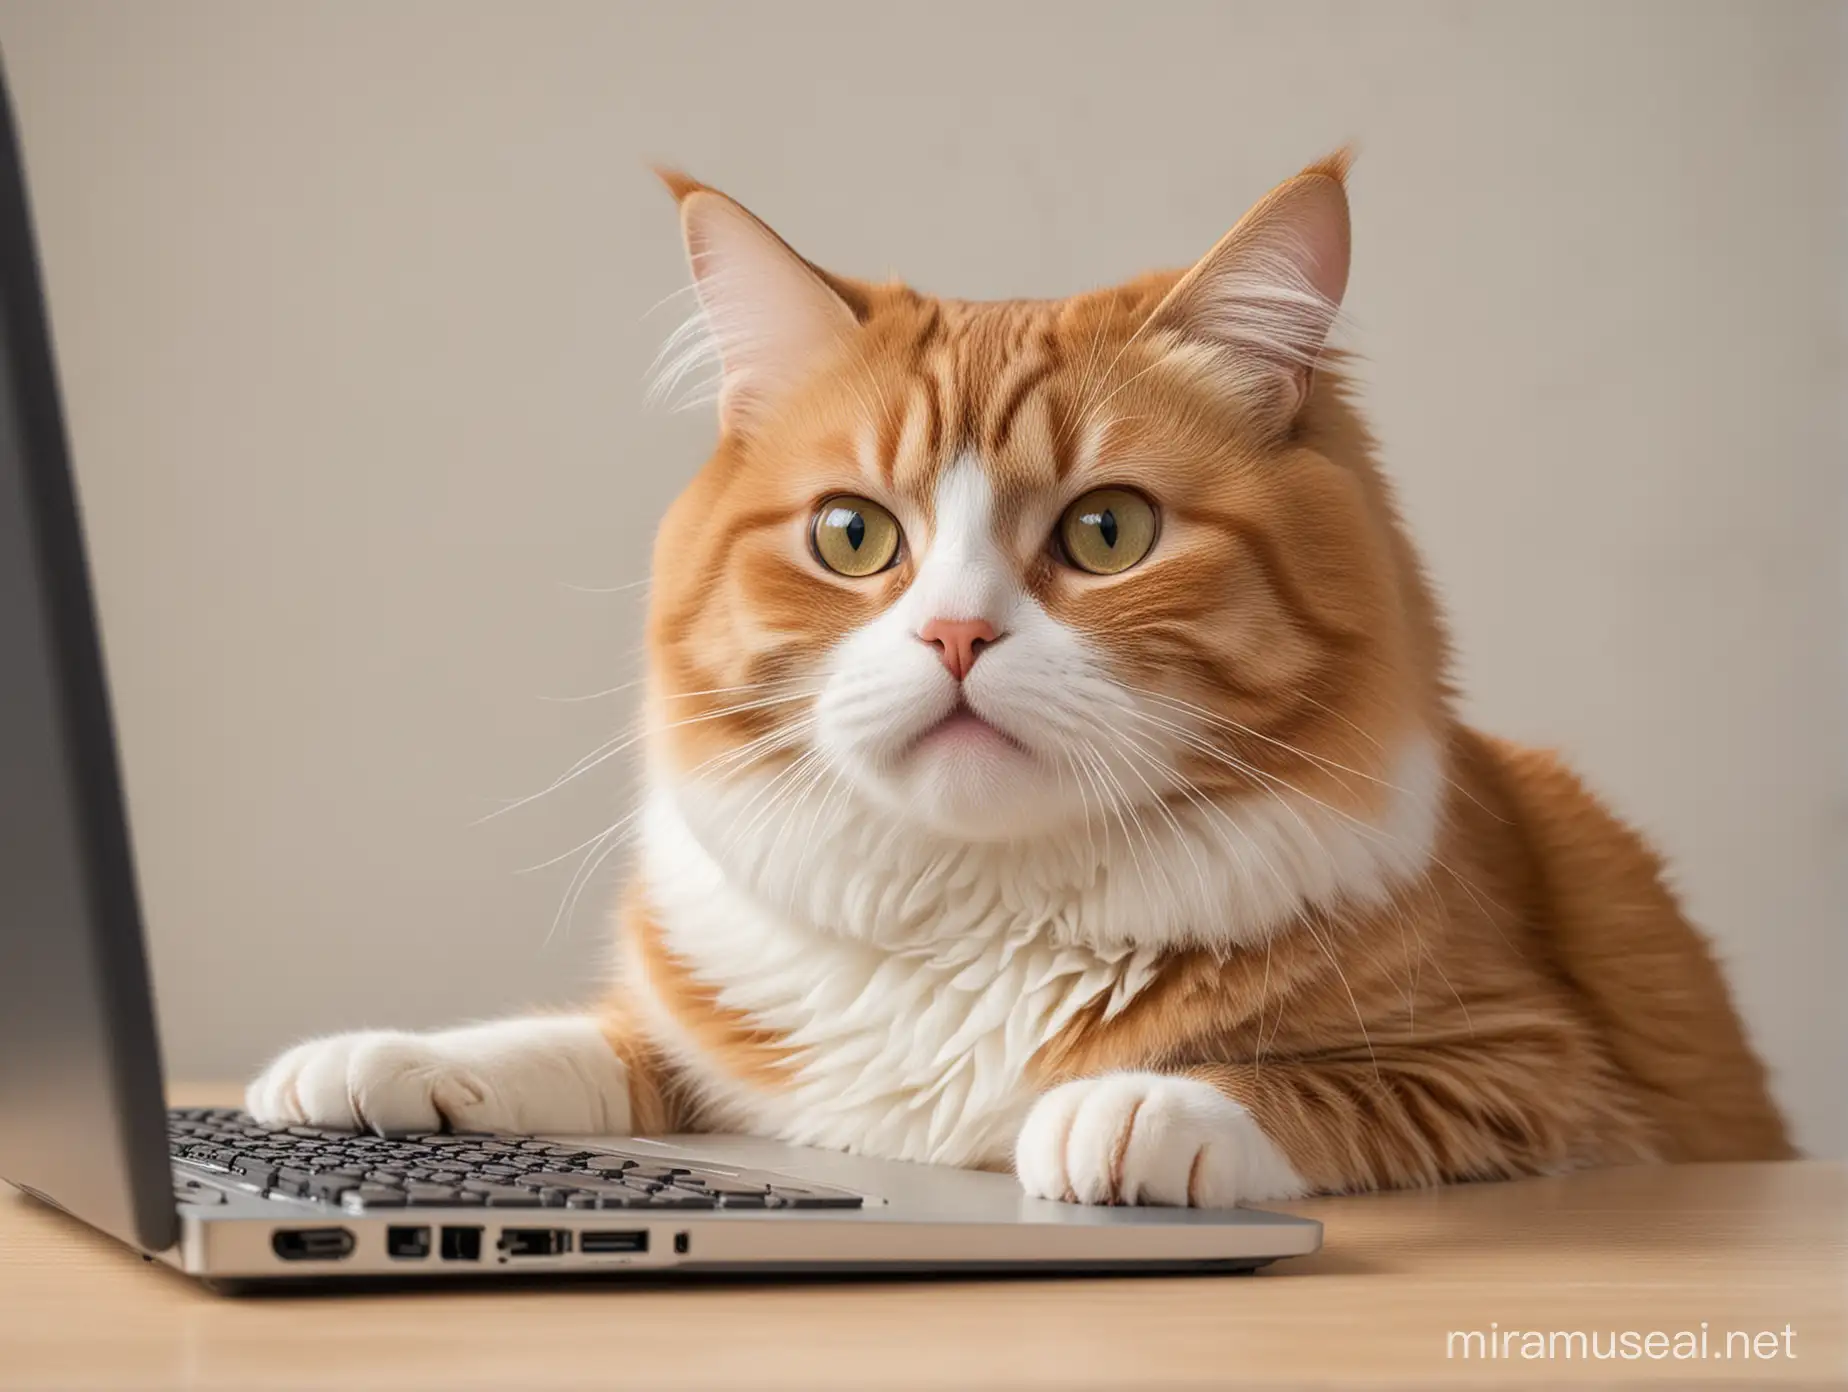 Curious Cat Learning Computer Skills from Human